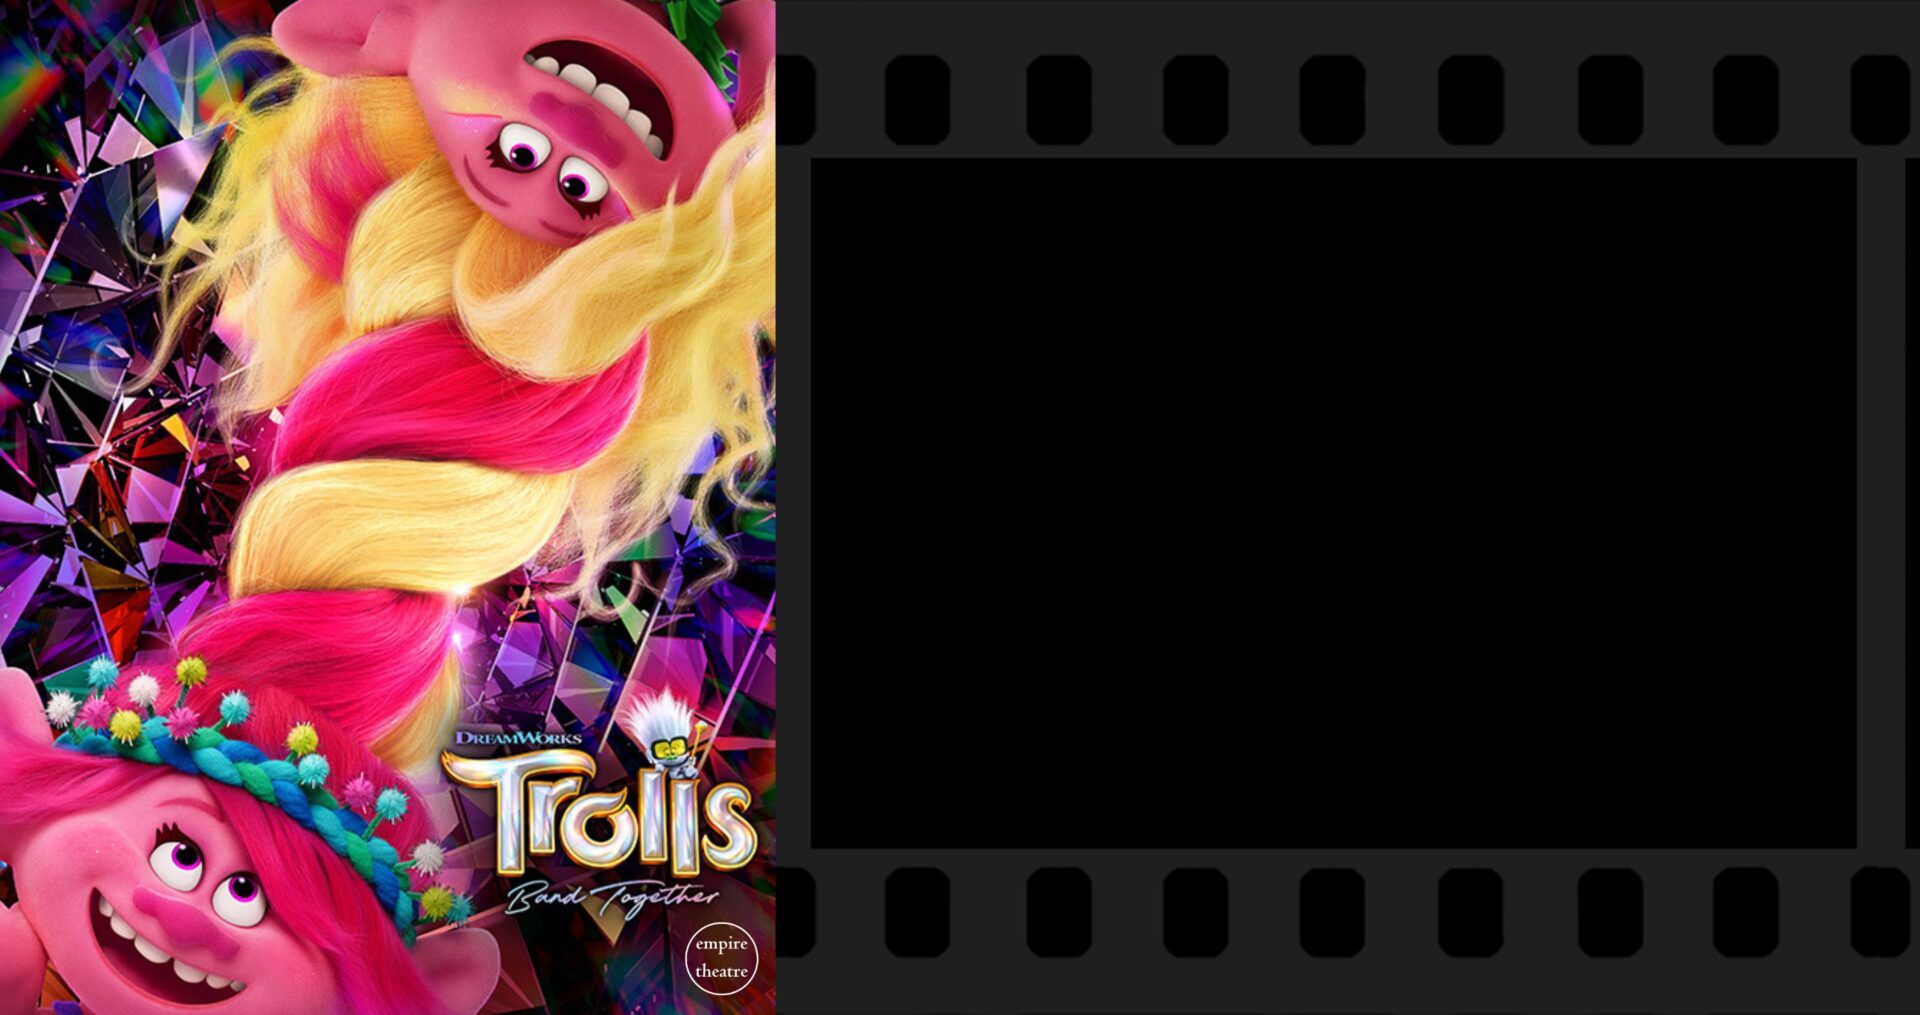 Empire Movie:  Trolls Band Together